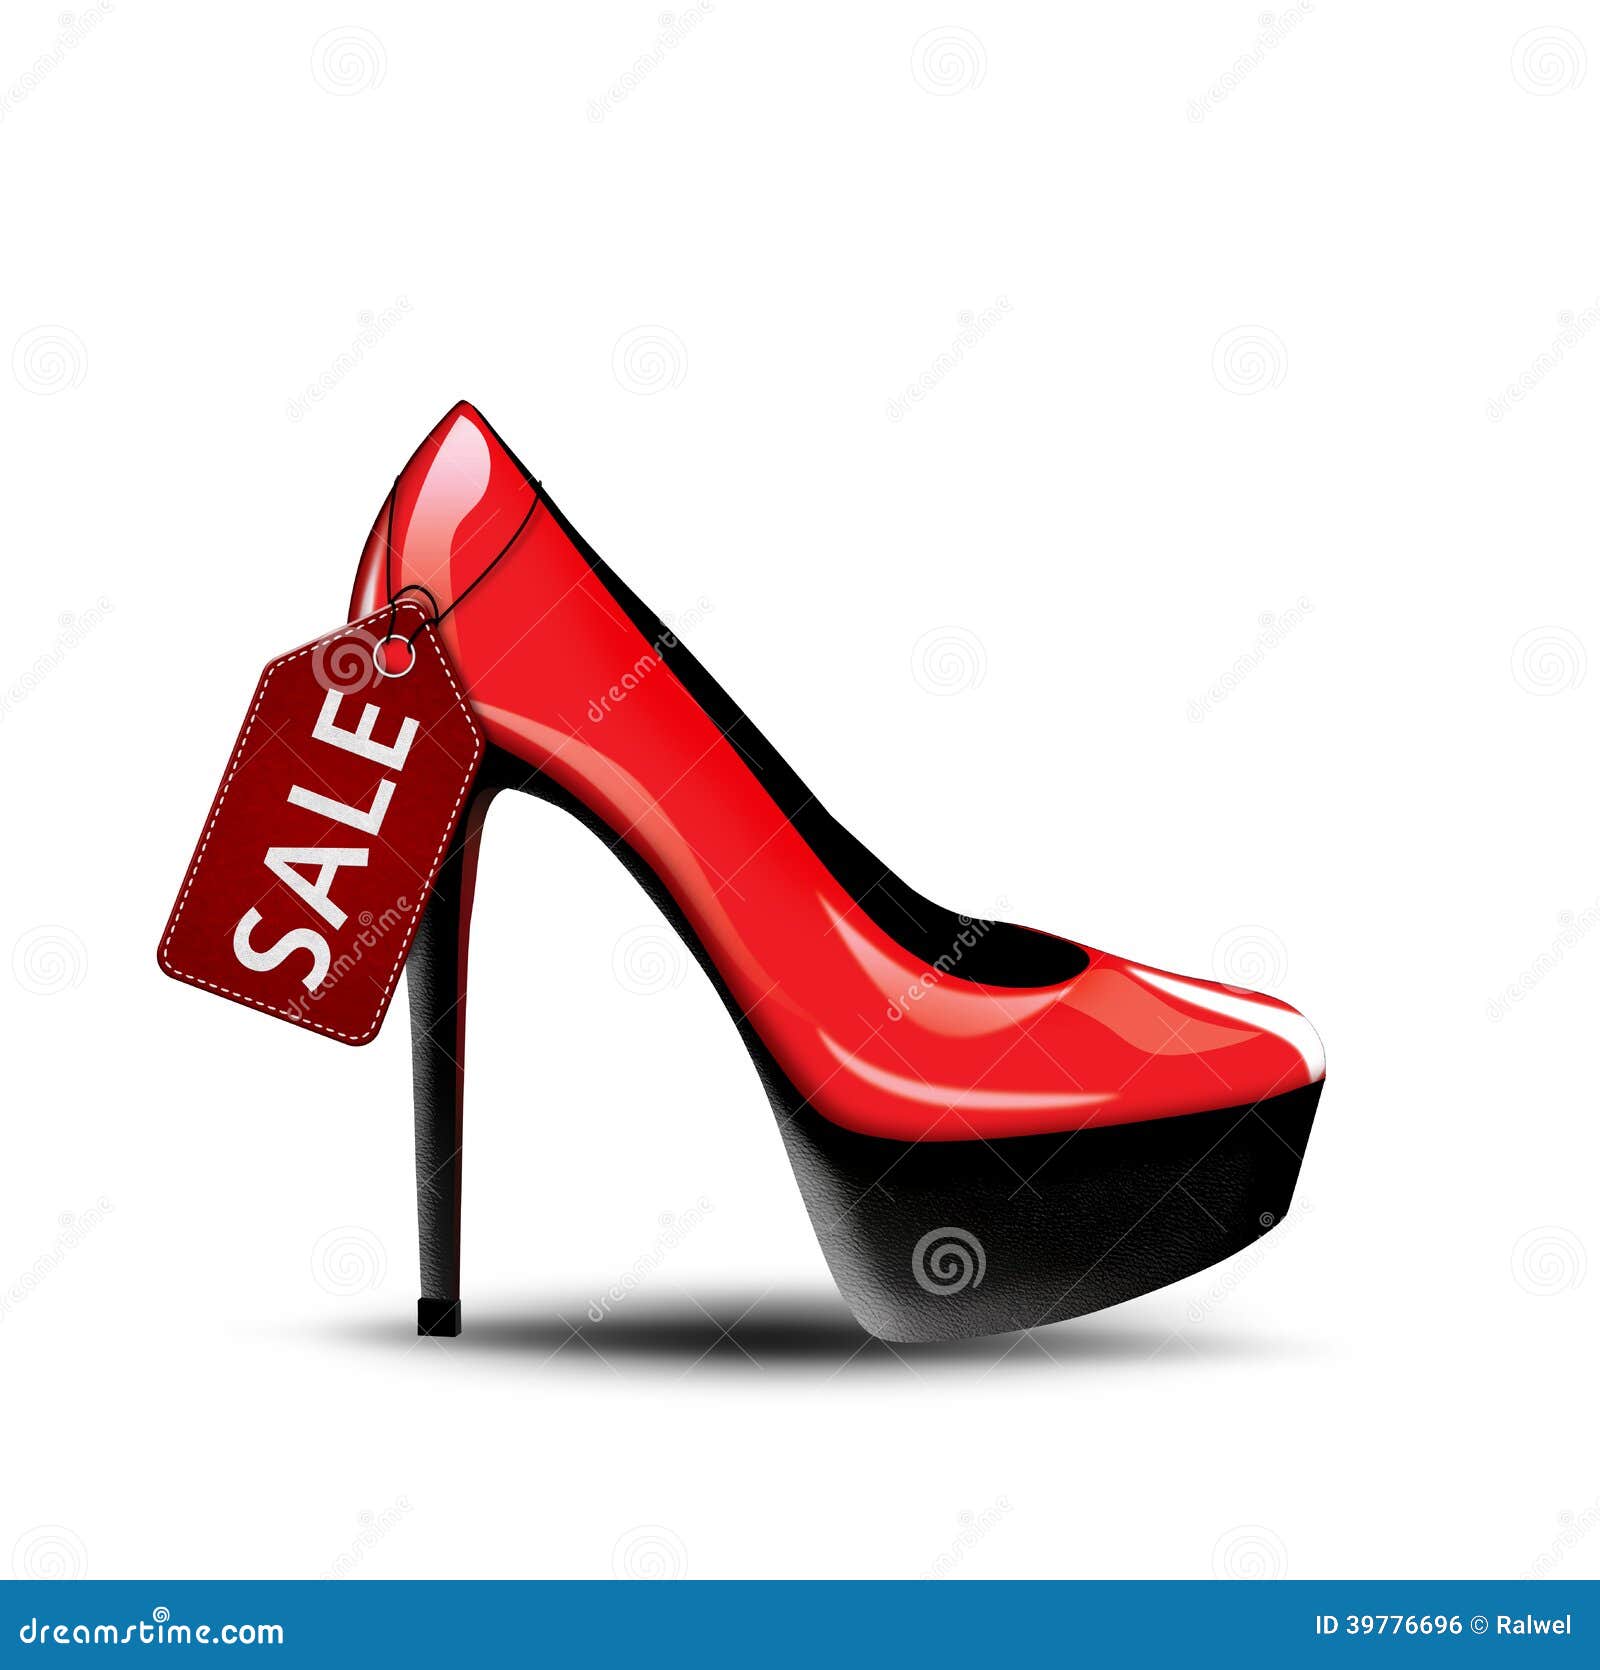 female shoes on sale